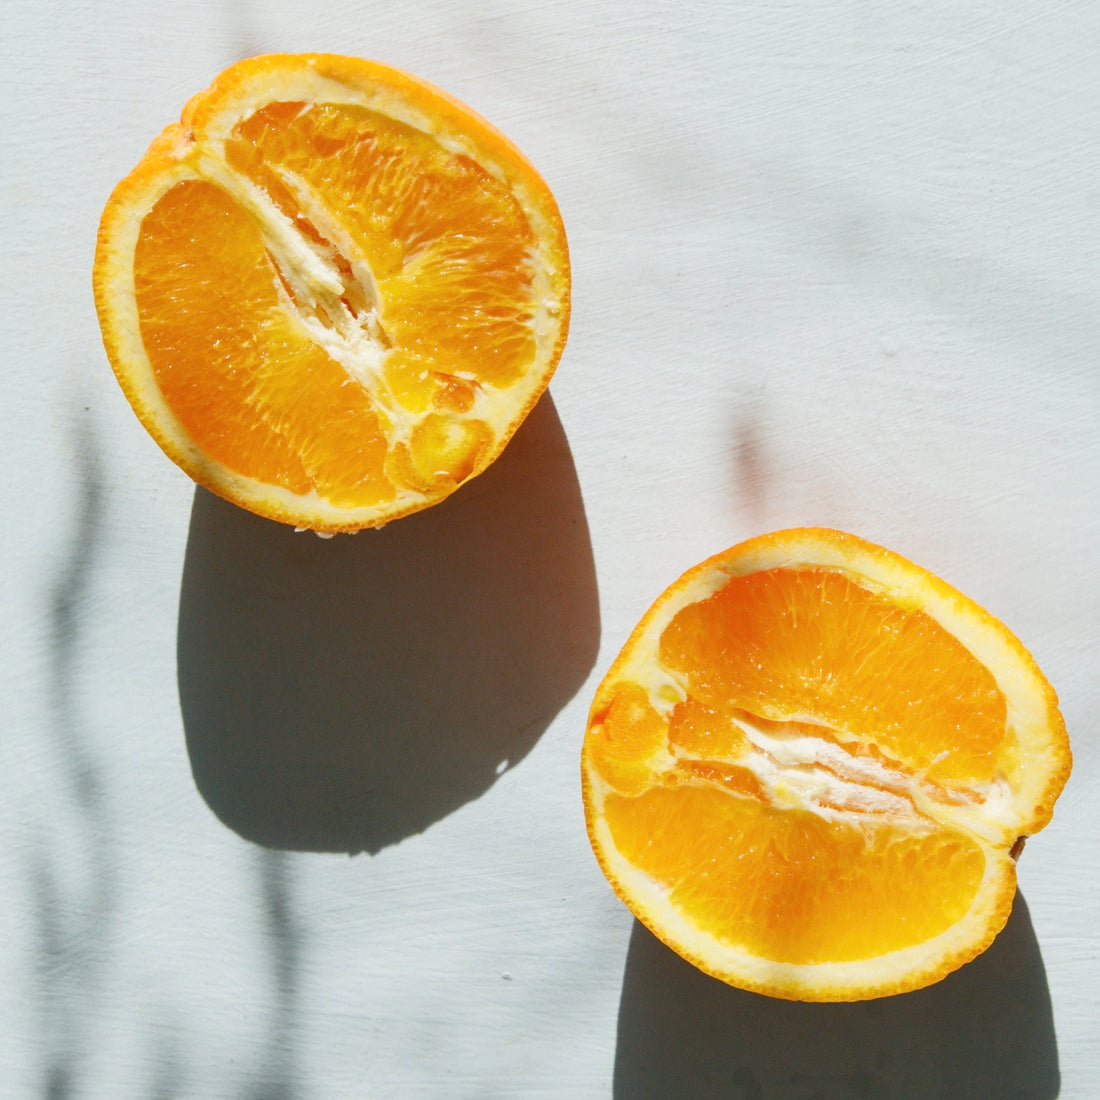 Vitamin C and the benefits for your skin